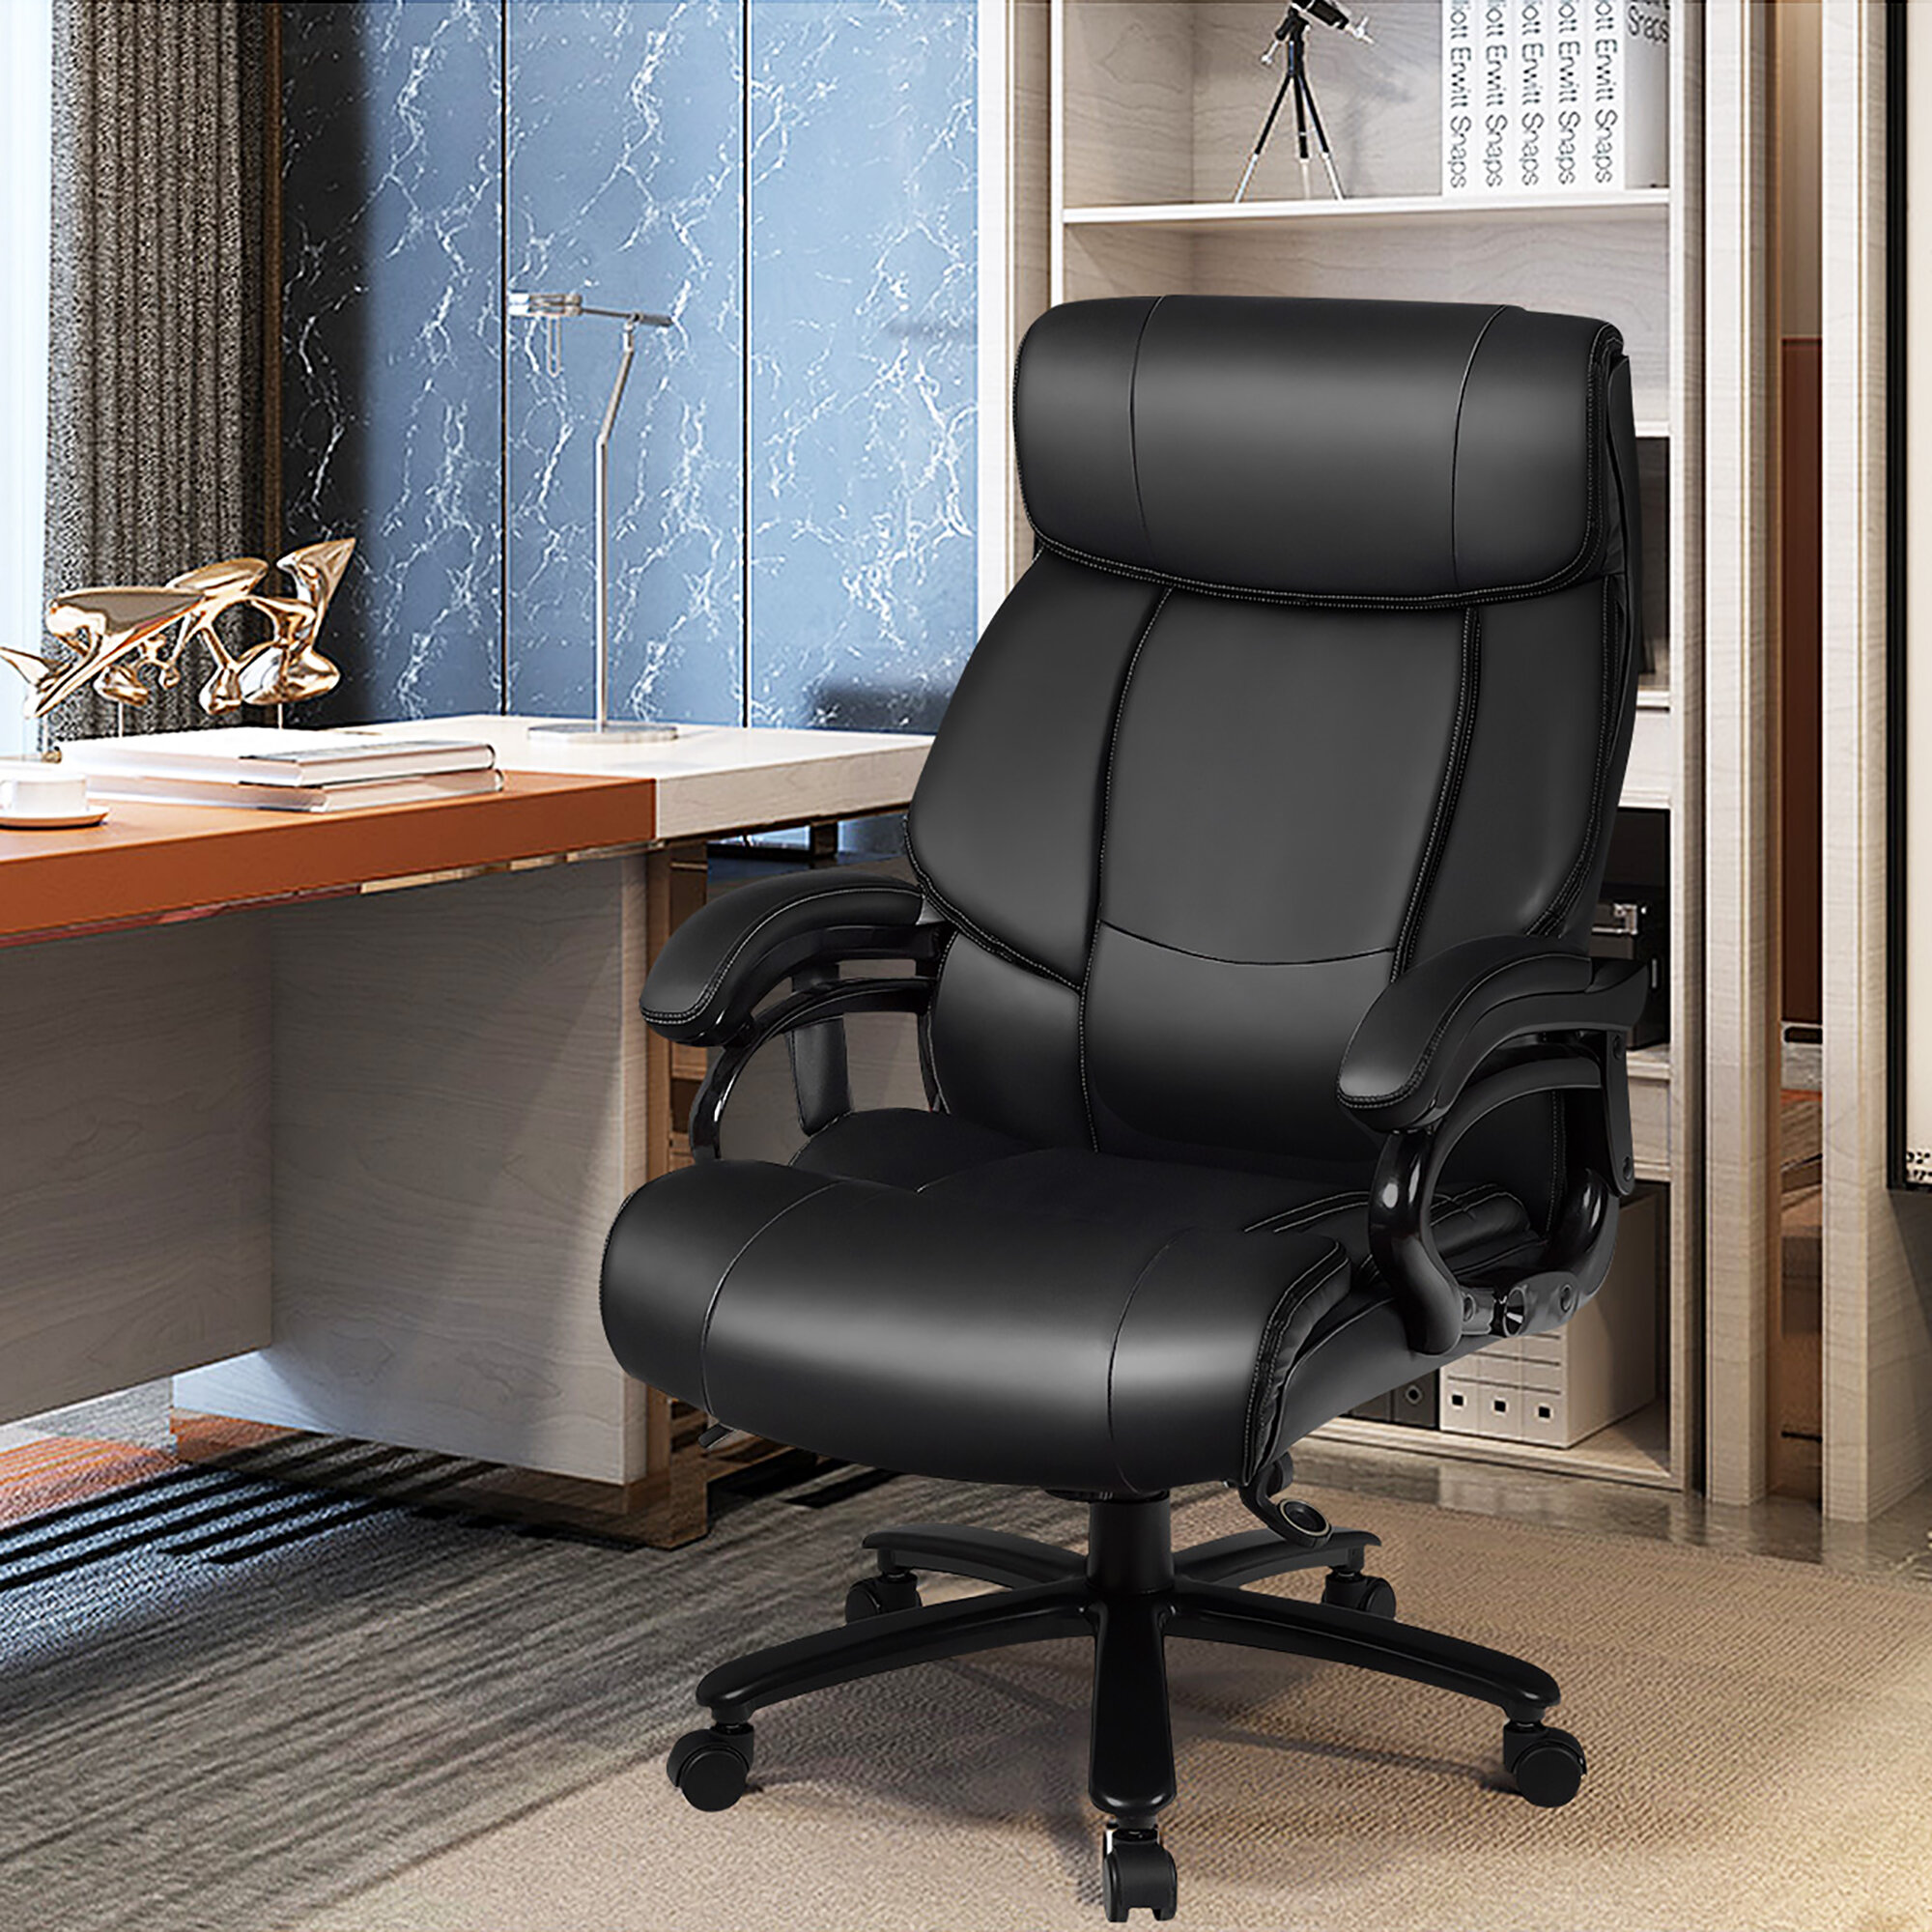 Hunter-Duncan Big and Tall Office Chair 500lbs for Heavy People Executive Chair Inbox Zero